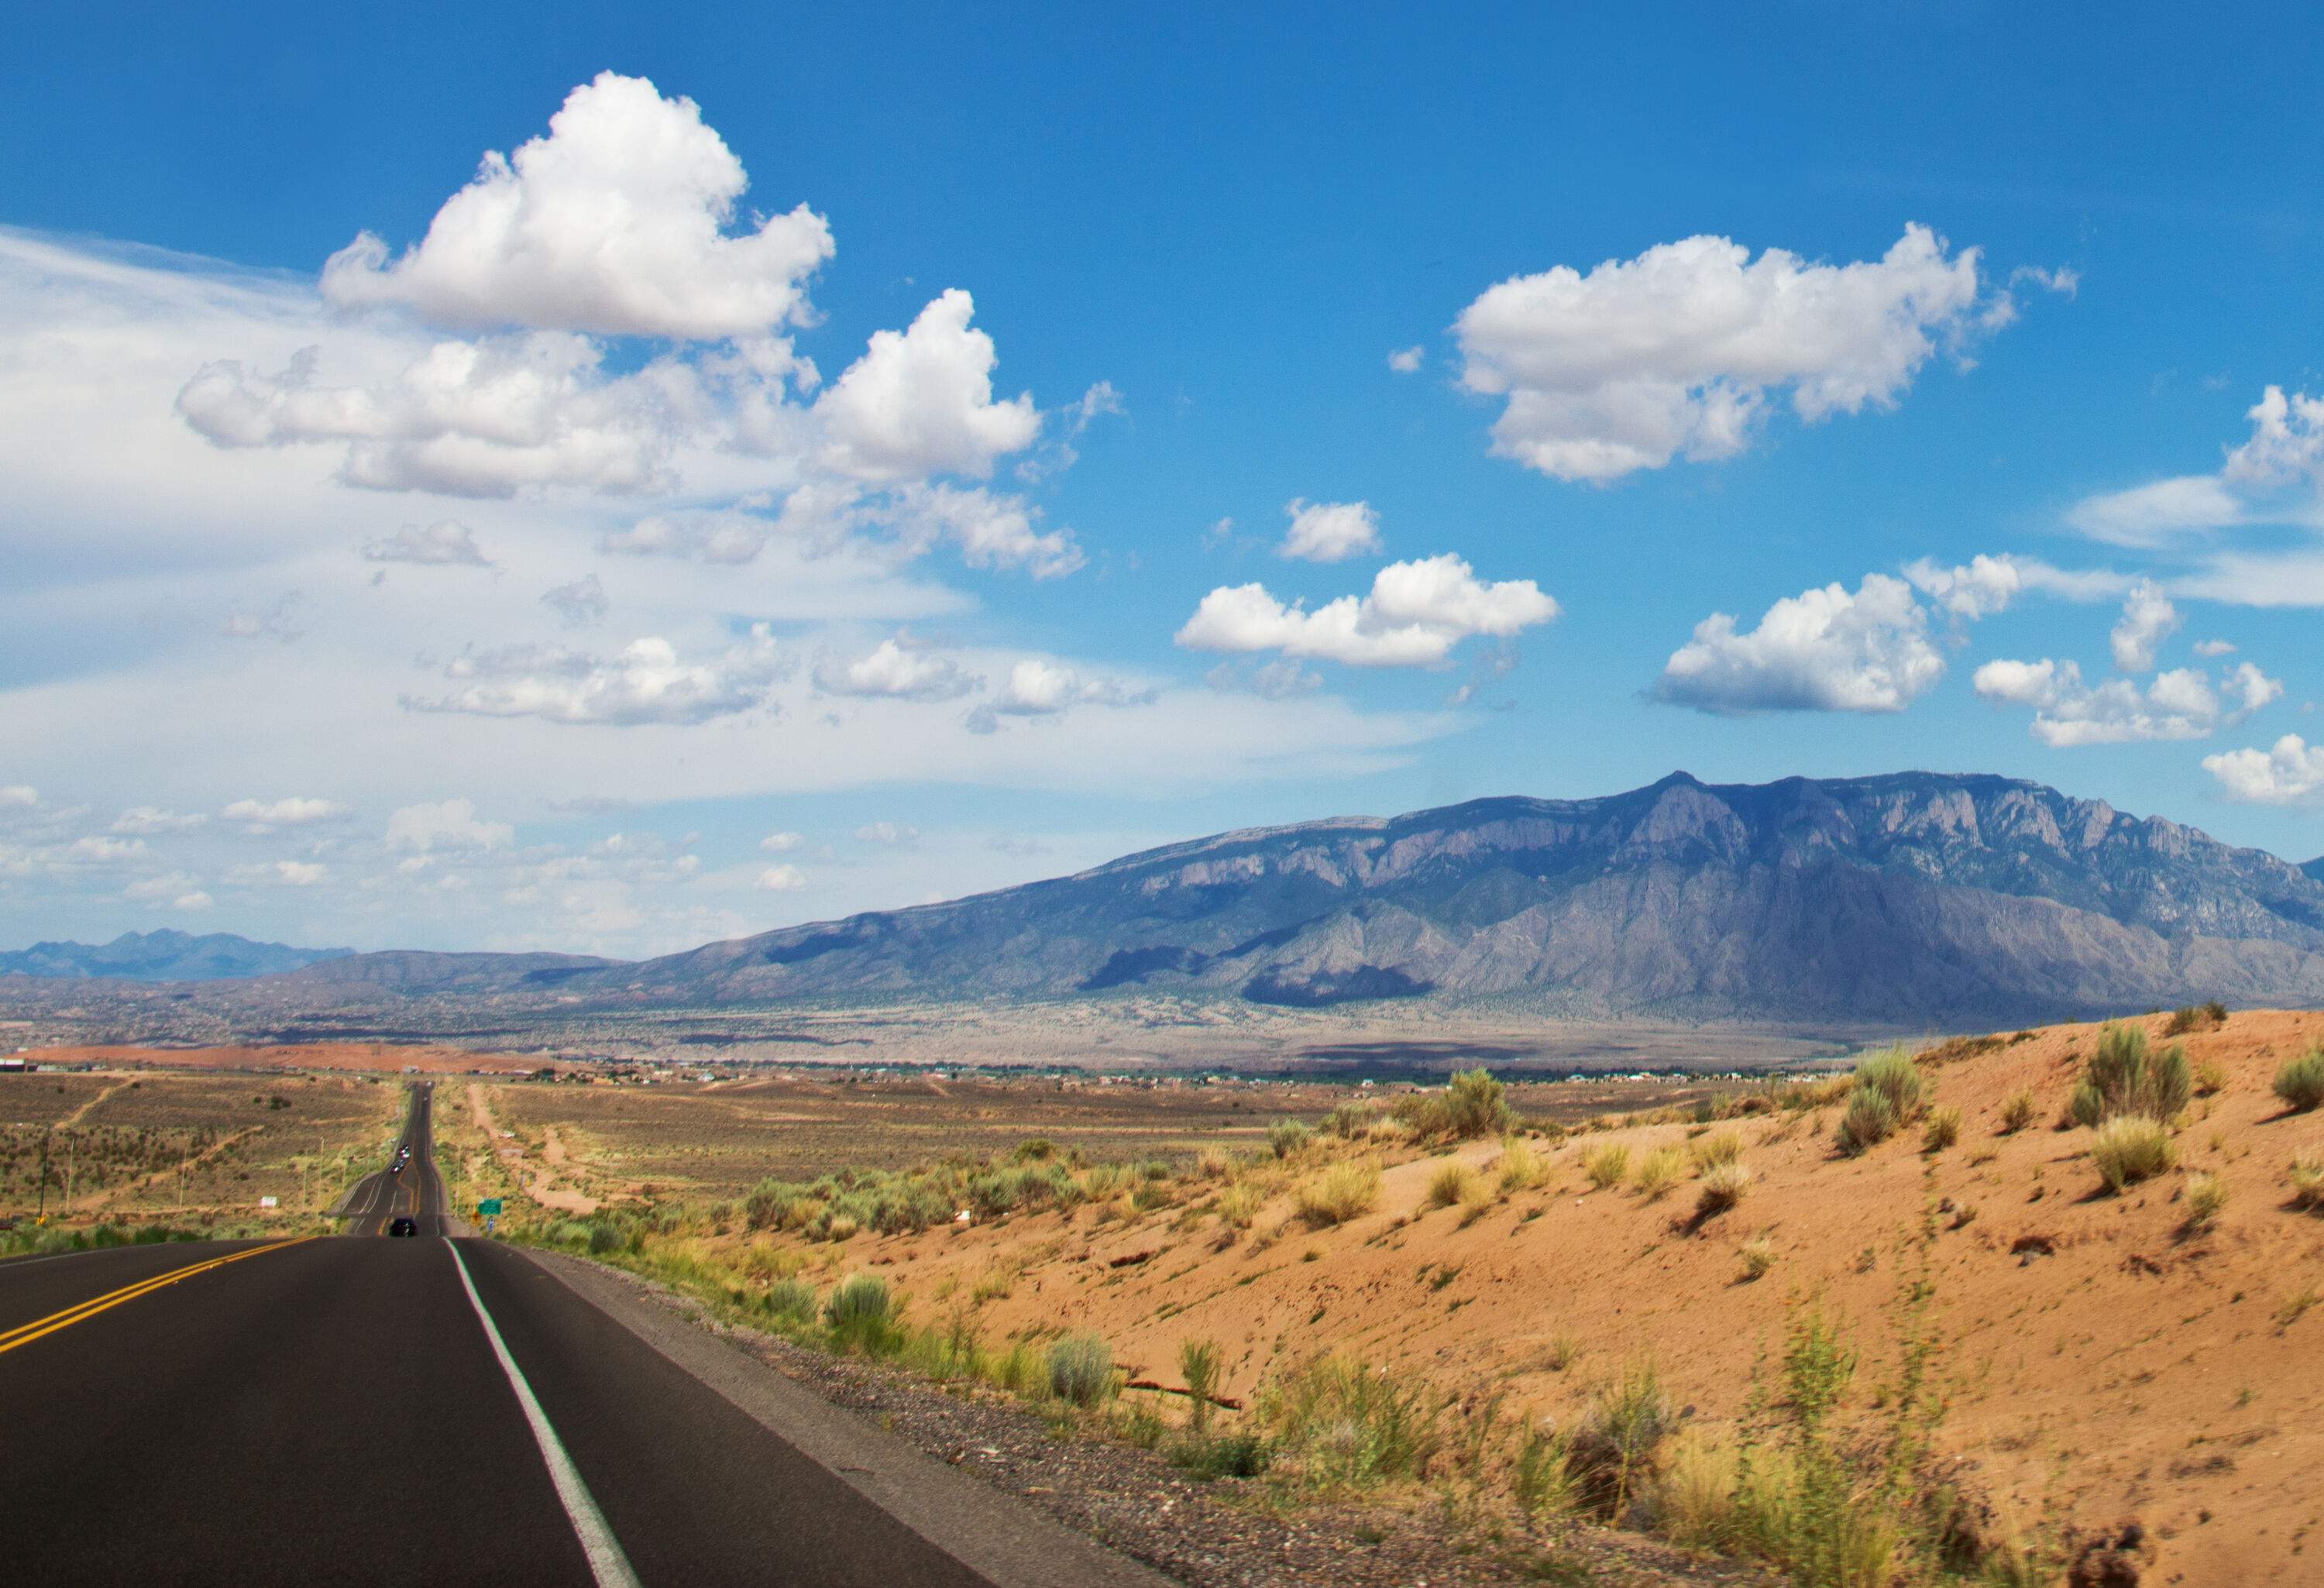 A long paved highway on a barren landscape overlooking the mountain range against the cloudy blue sky.